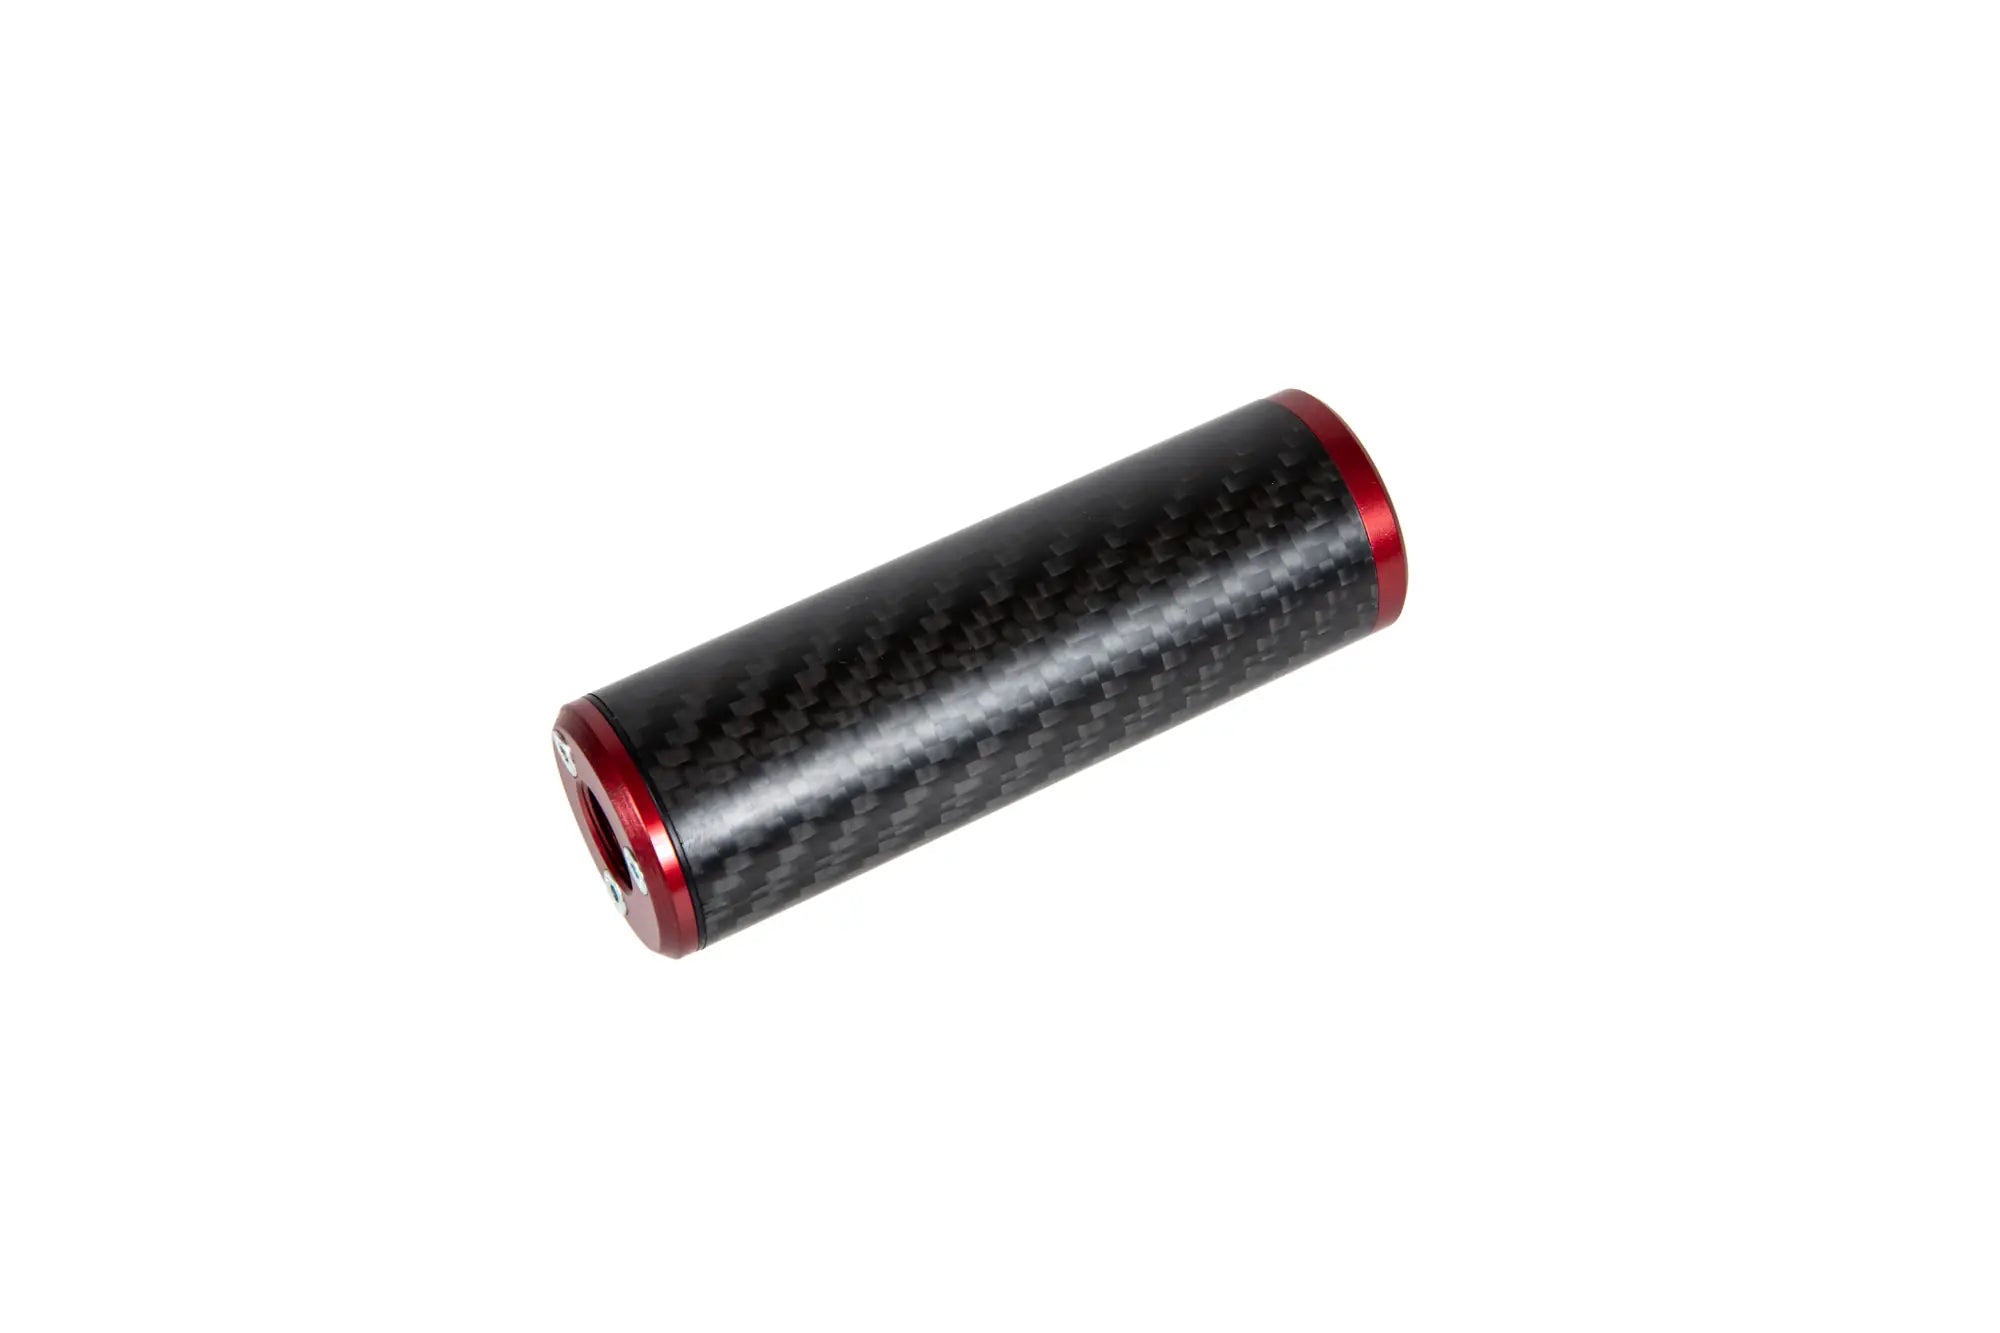 Carbon Silencer 30x100mm - Red